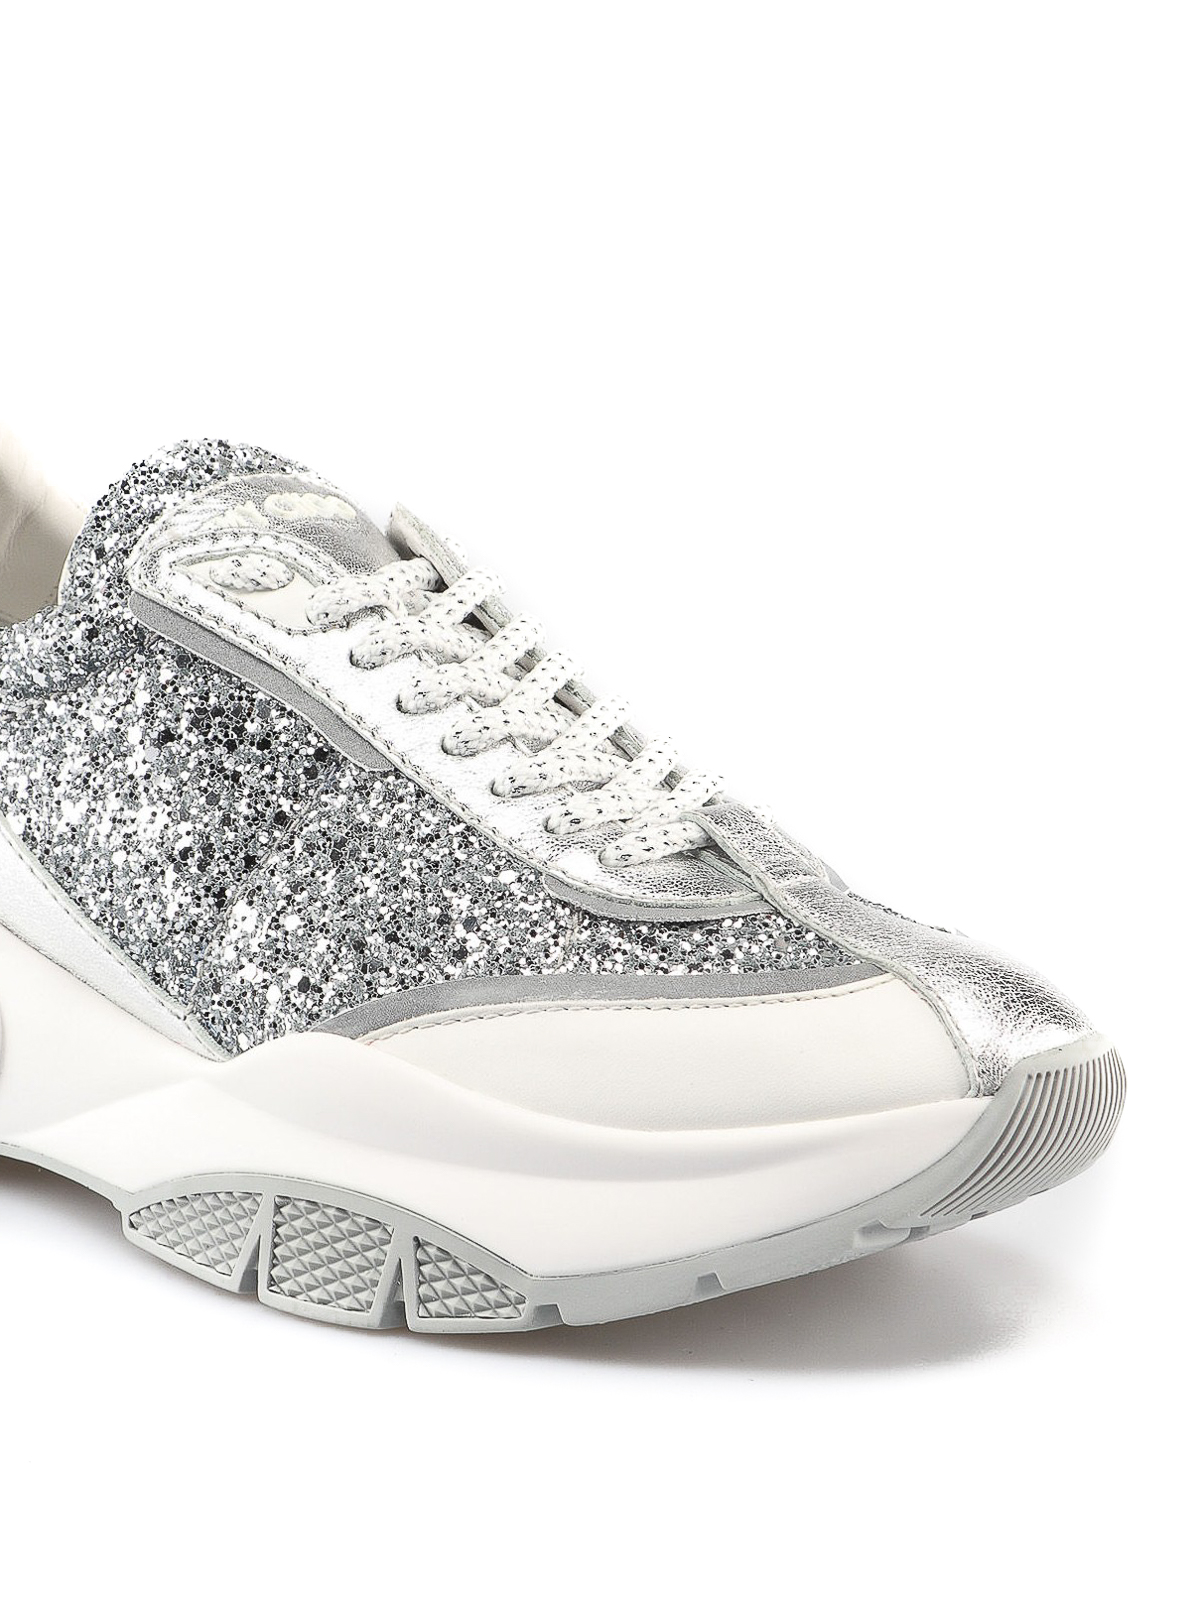 Jimmy Choo Raine Glitter Sneakers Poland, SAVE 51% - aveclumiere.com